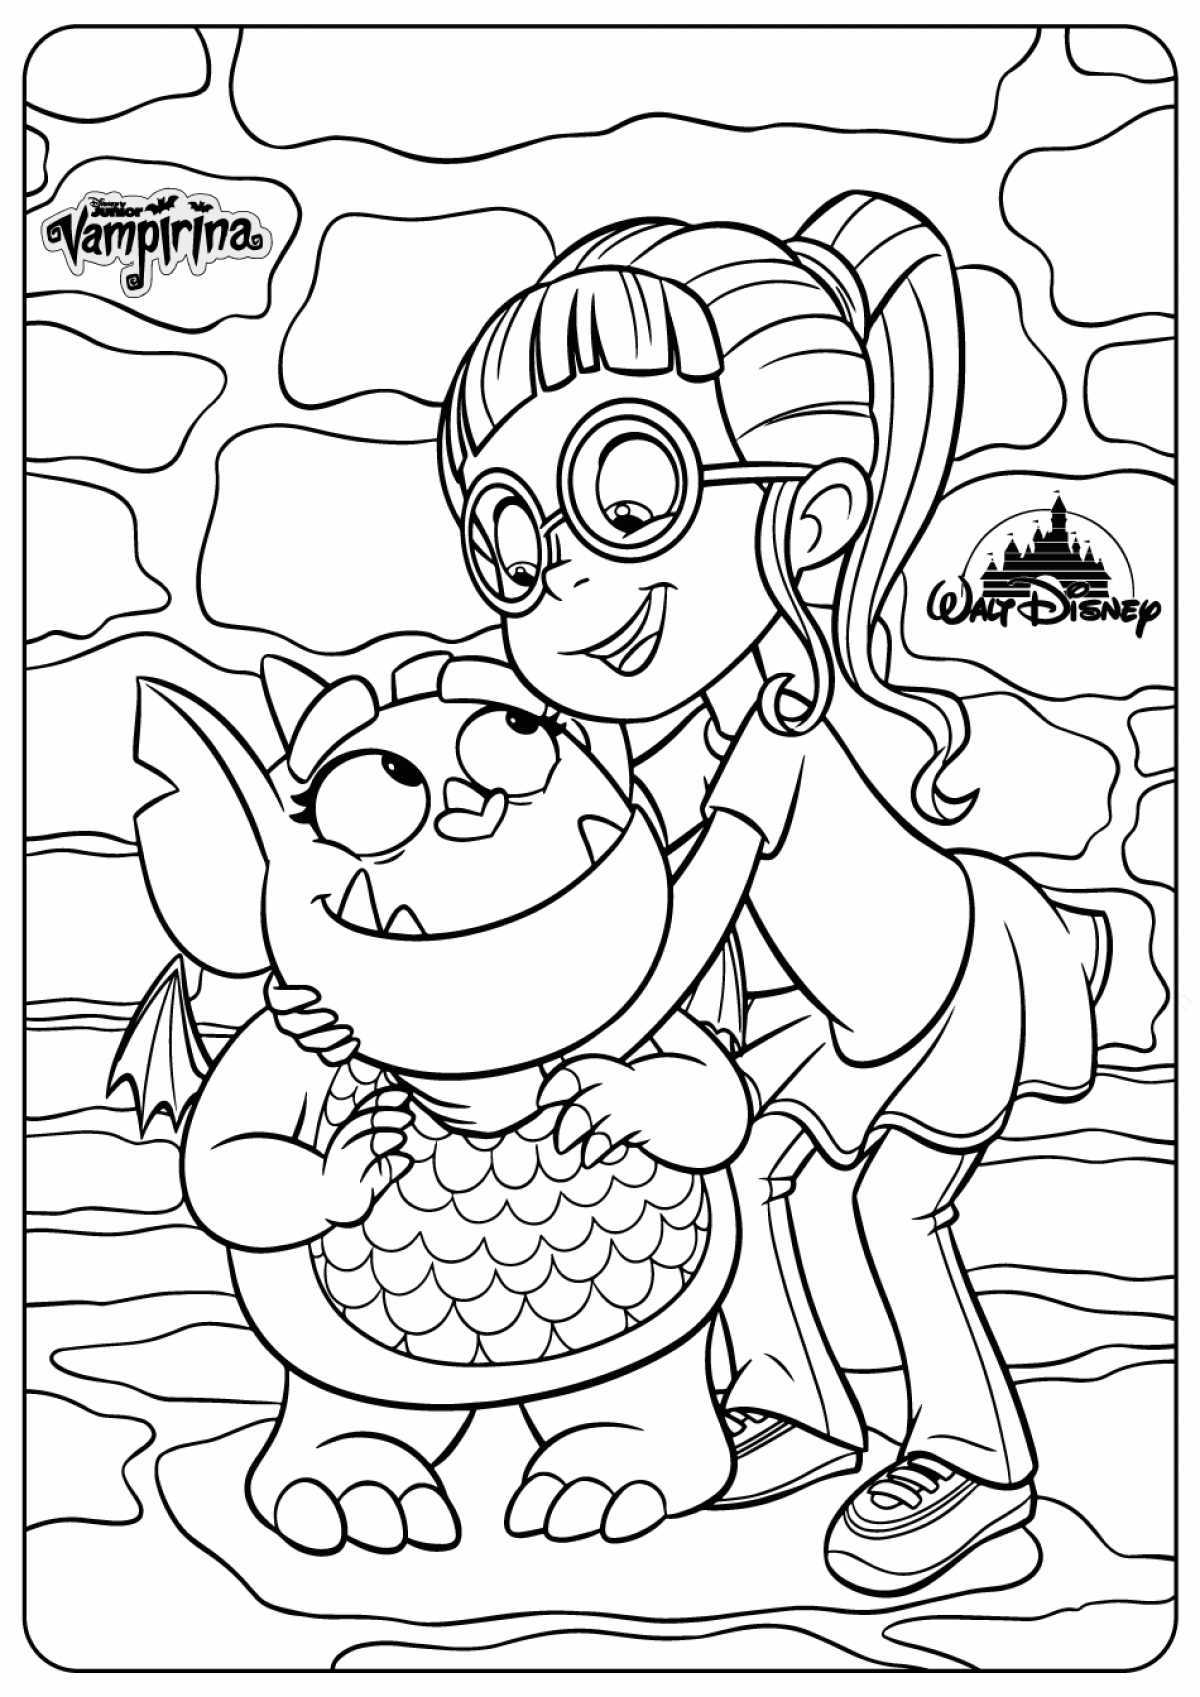 Cute Vampirina Coloring Pages Coloring Pages